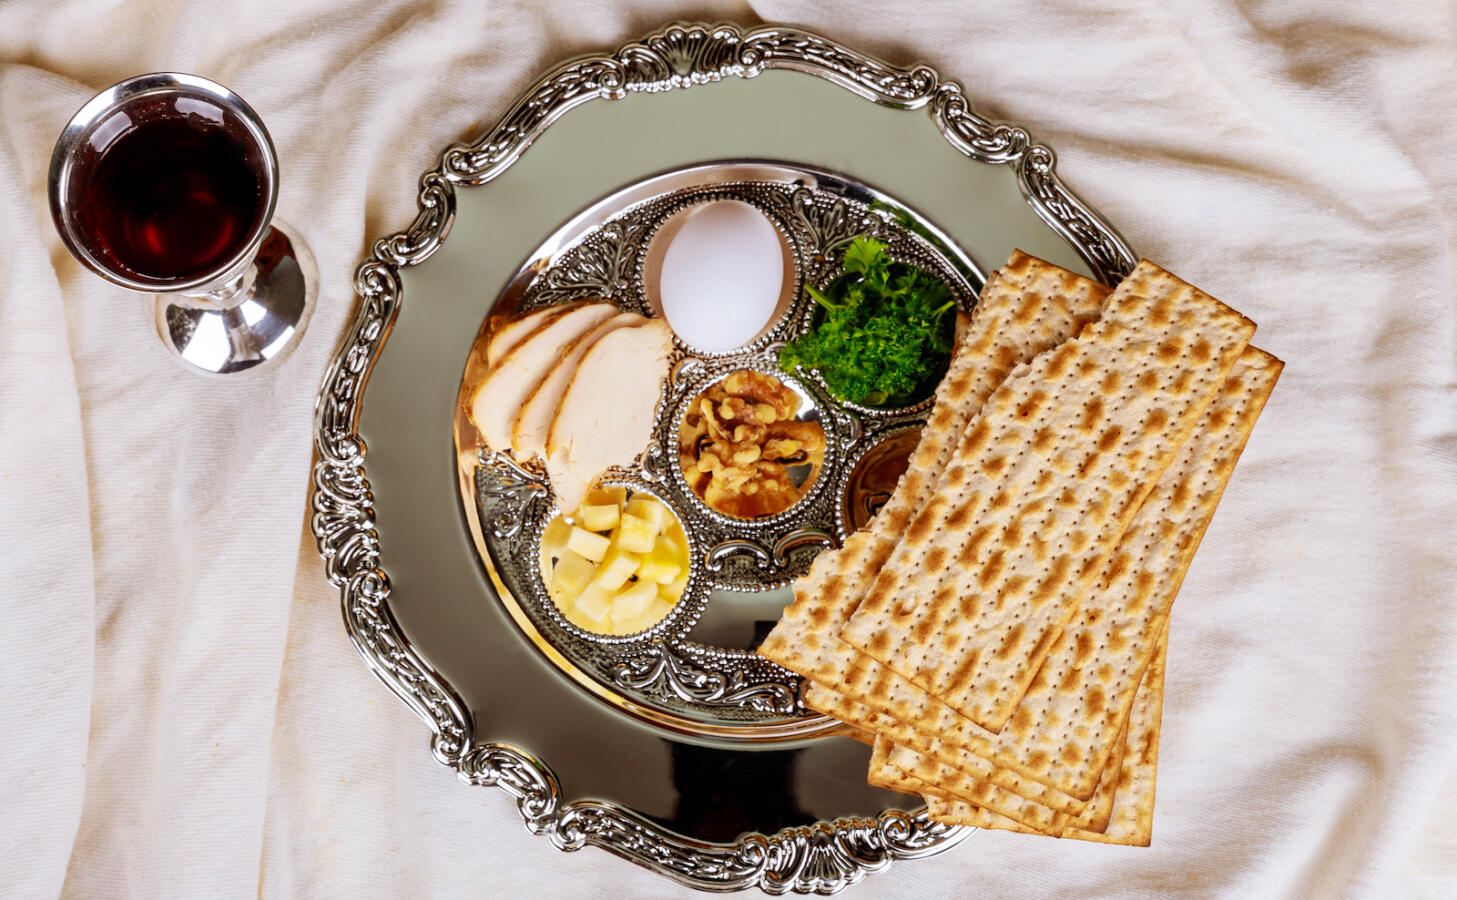 Pesah celebration concept jewish Passover holiday . Traditional pesah plate text in hebrew: Passover, egg,